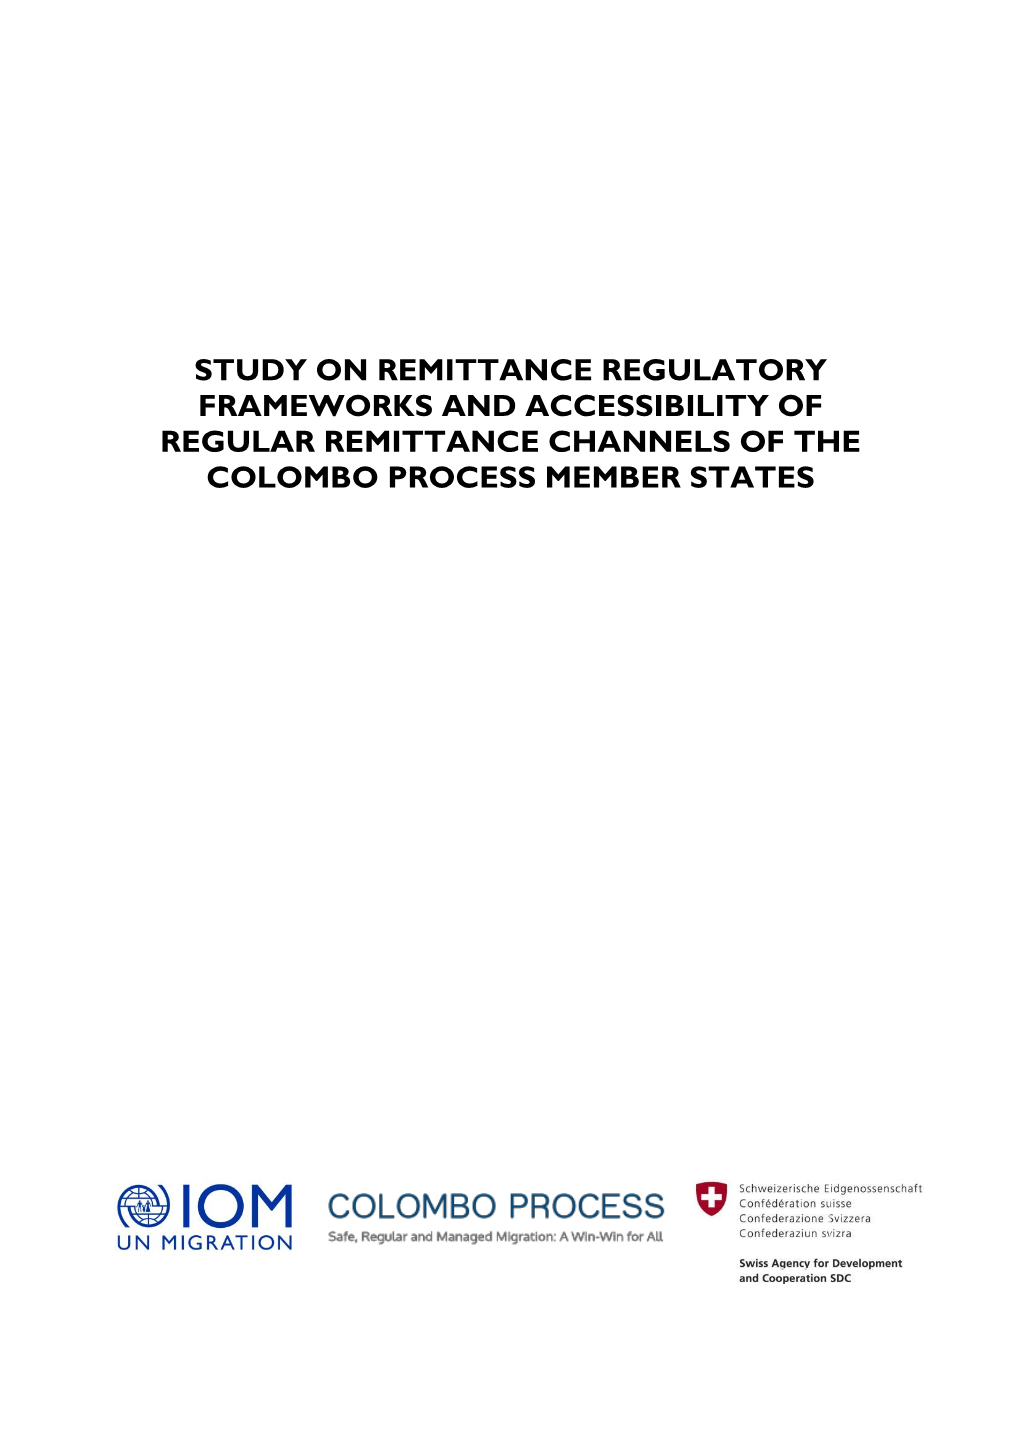 Study on Remittance Regulatory Frameworks and Accessibility of Regular Remittance Channels of the Colombo Process Member States